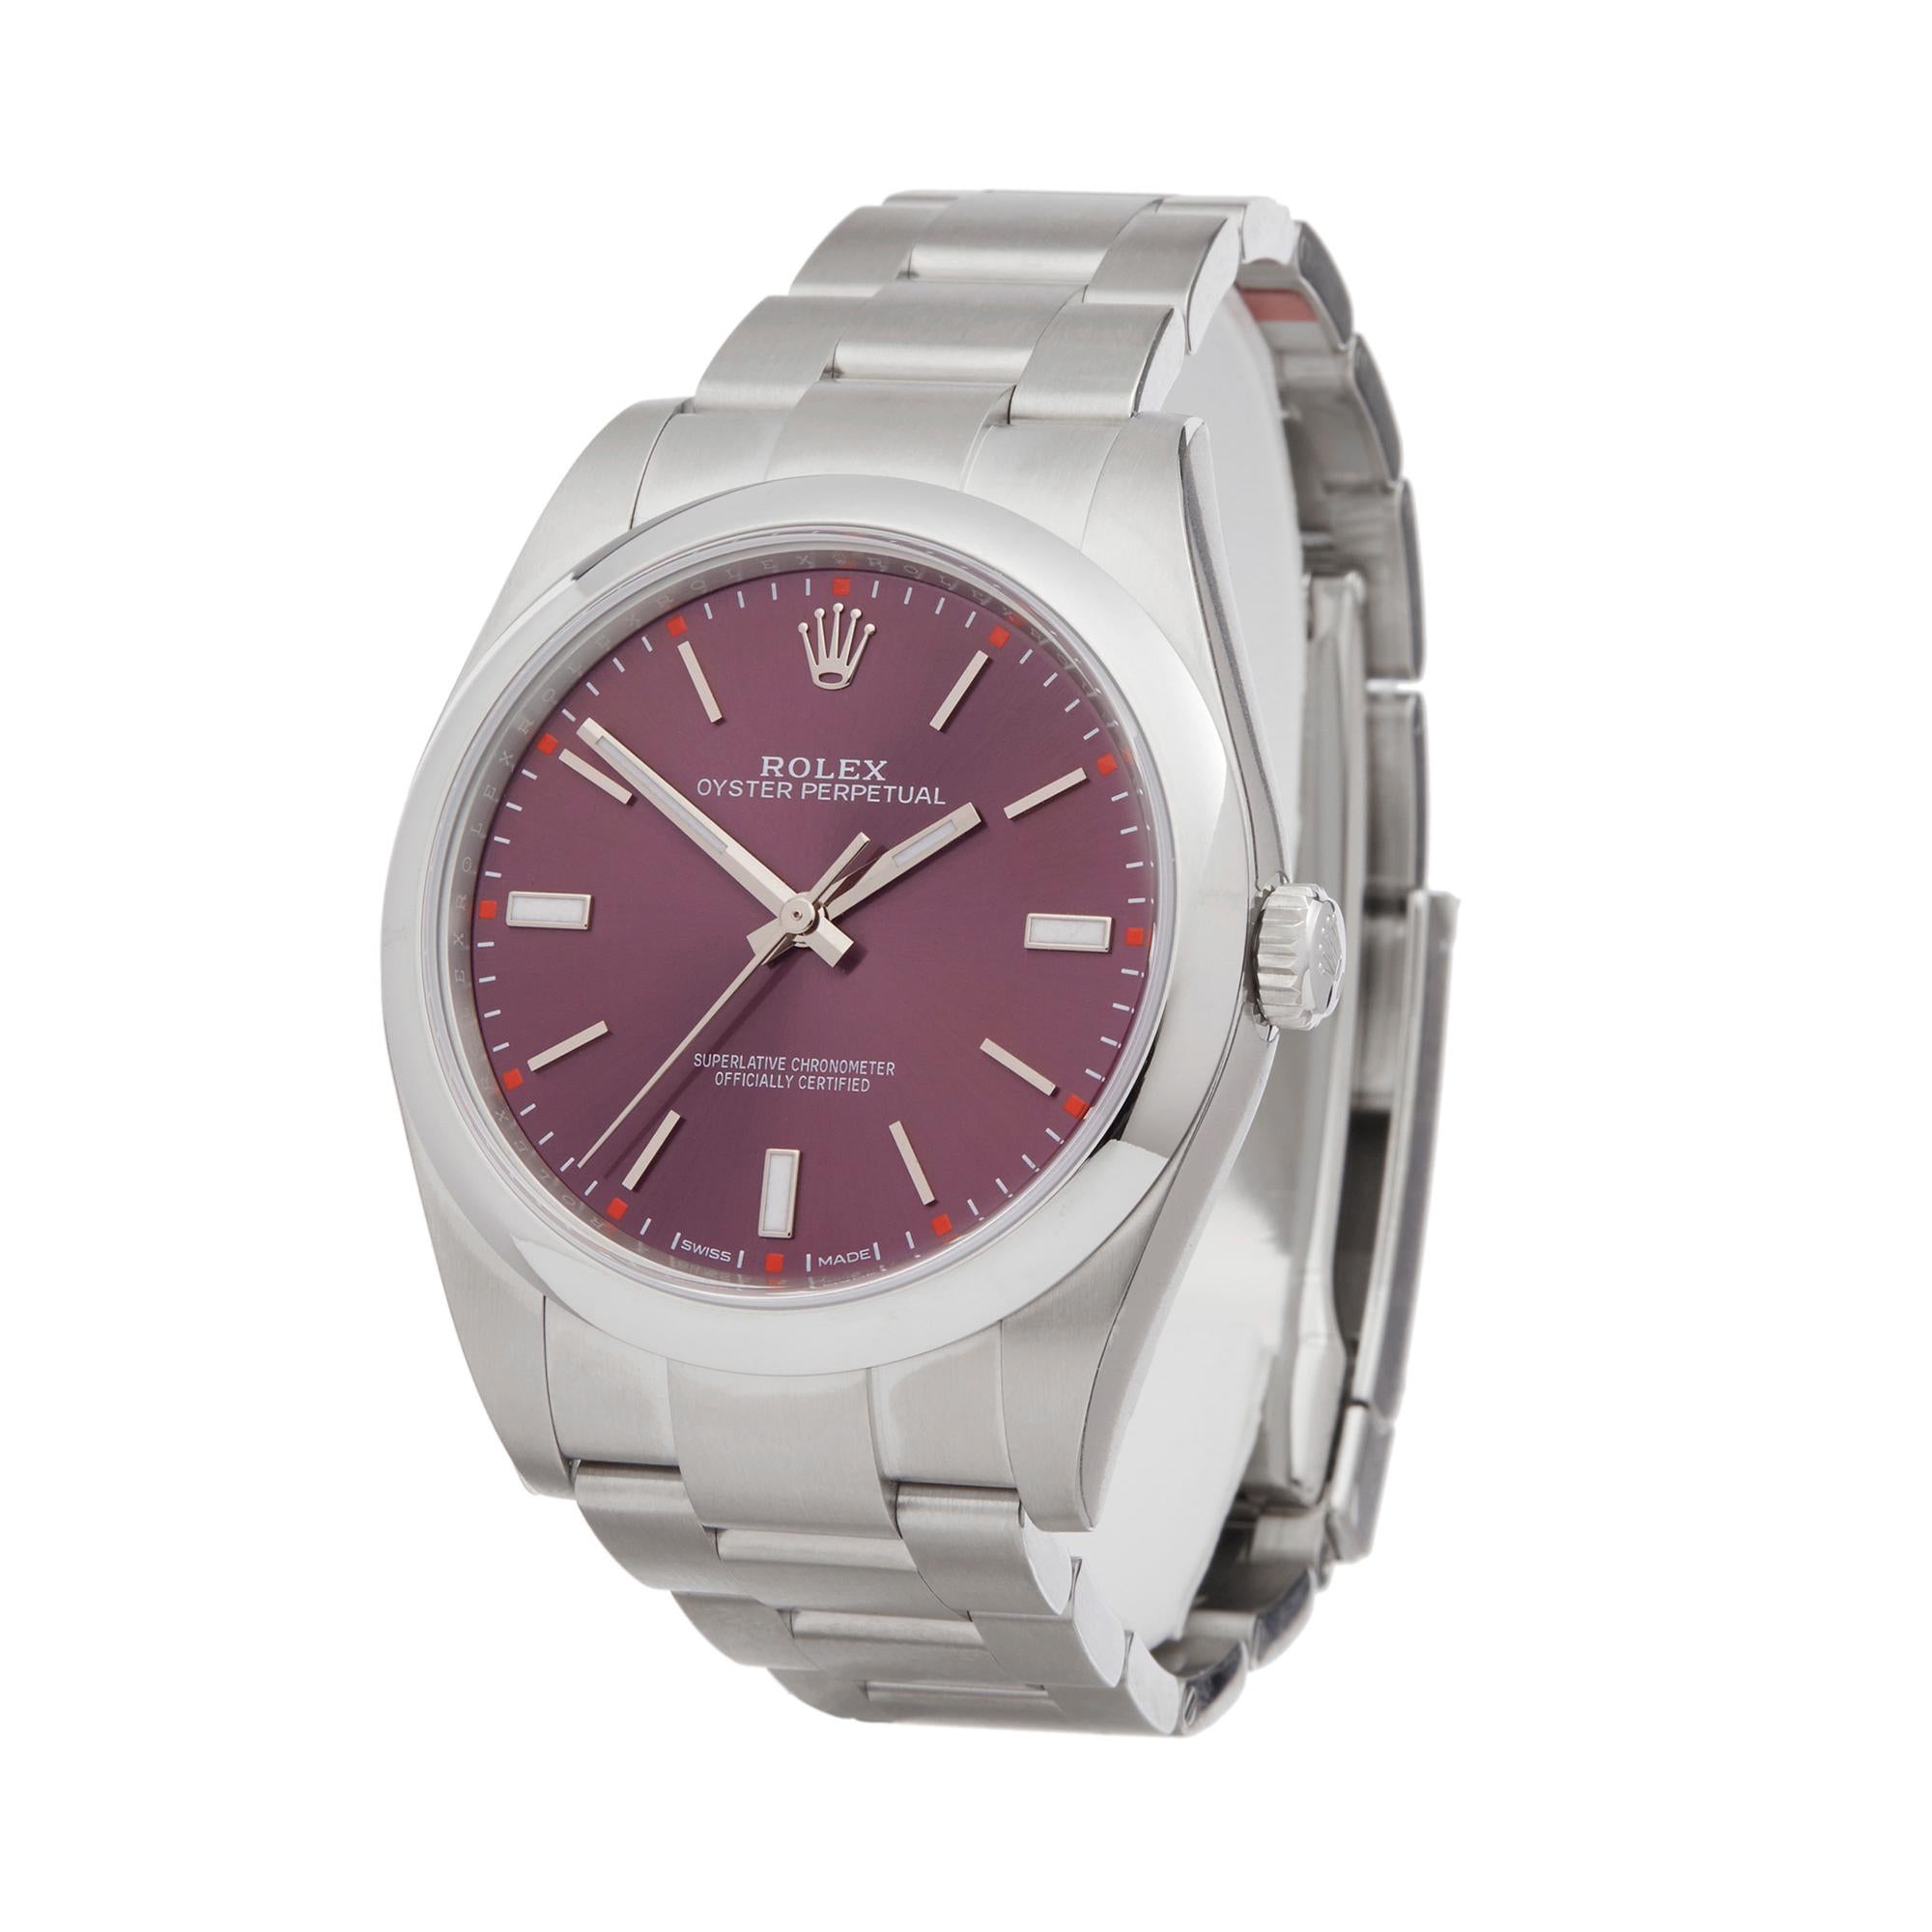 Ref: W6218
Manufacturer: Rolex
Model: Oyster Perpetual
Model Ref: 114300
Age: 29th October 2018
Gender: Mens
Complete With: Box & Guarantee
Dial: Red Grape Baton
Glass: Sapphire Crystal
Movement: Automatic
Water Resistance: To Manufacturers